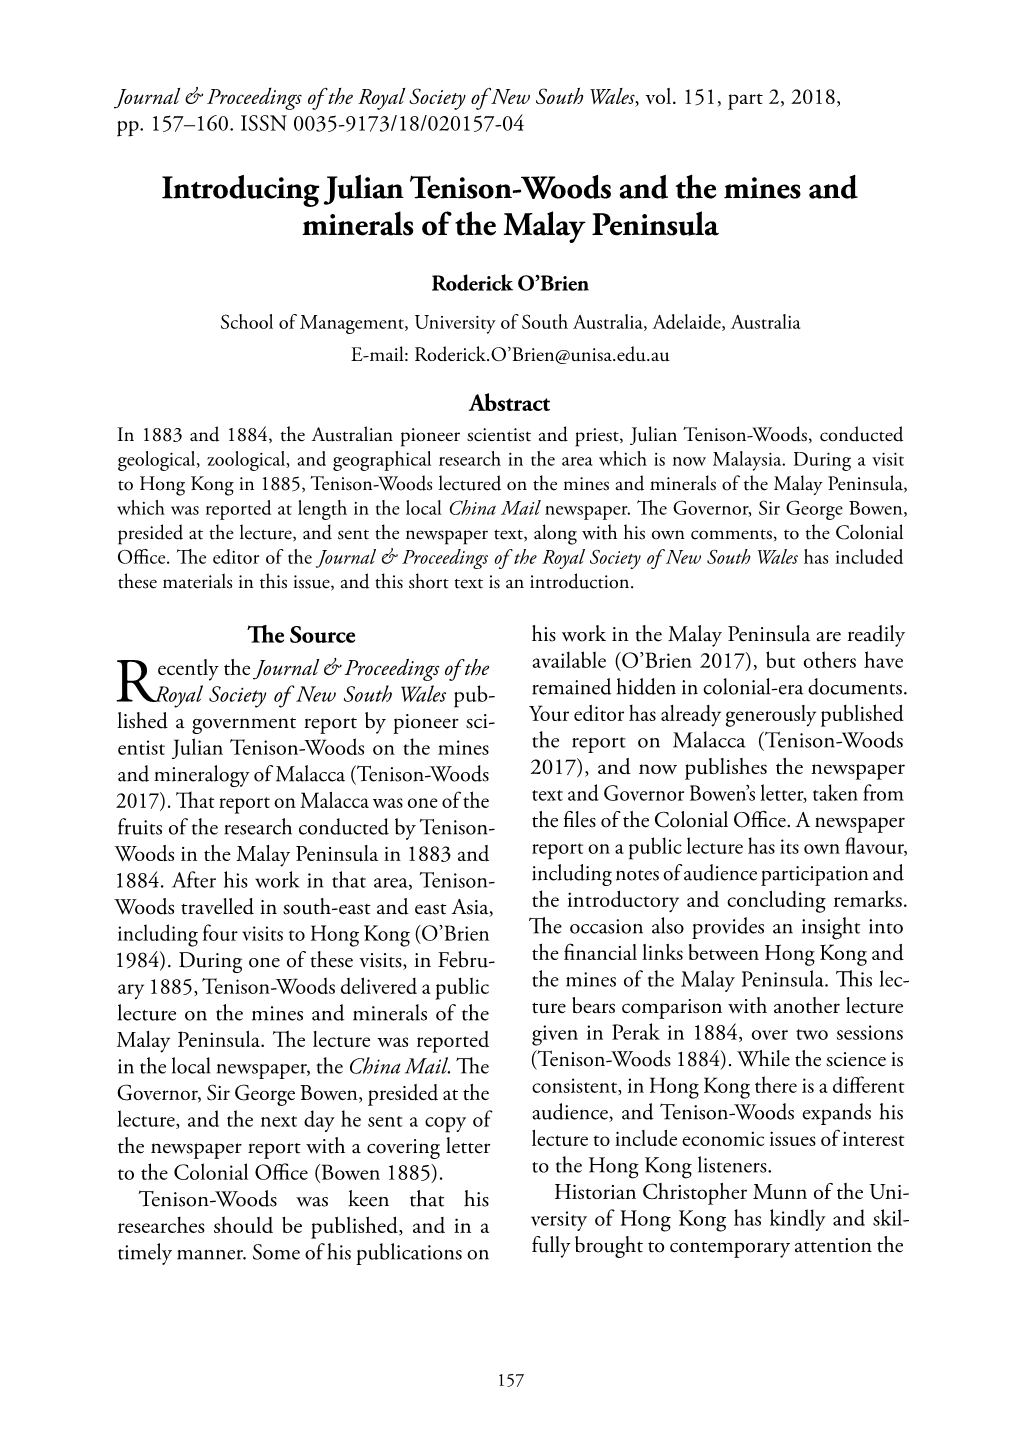 Introducing Julian Tenison-Woods and the Mines and Minerals of the Malay Peninsula